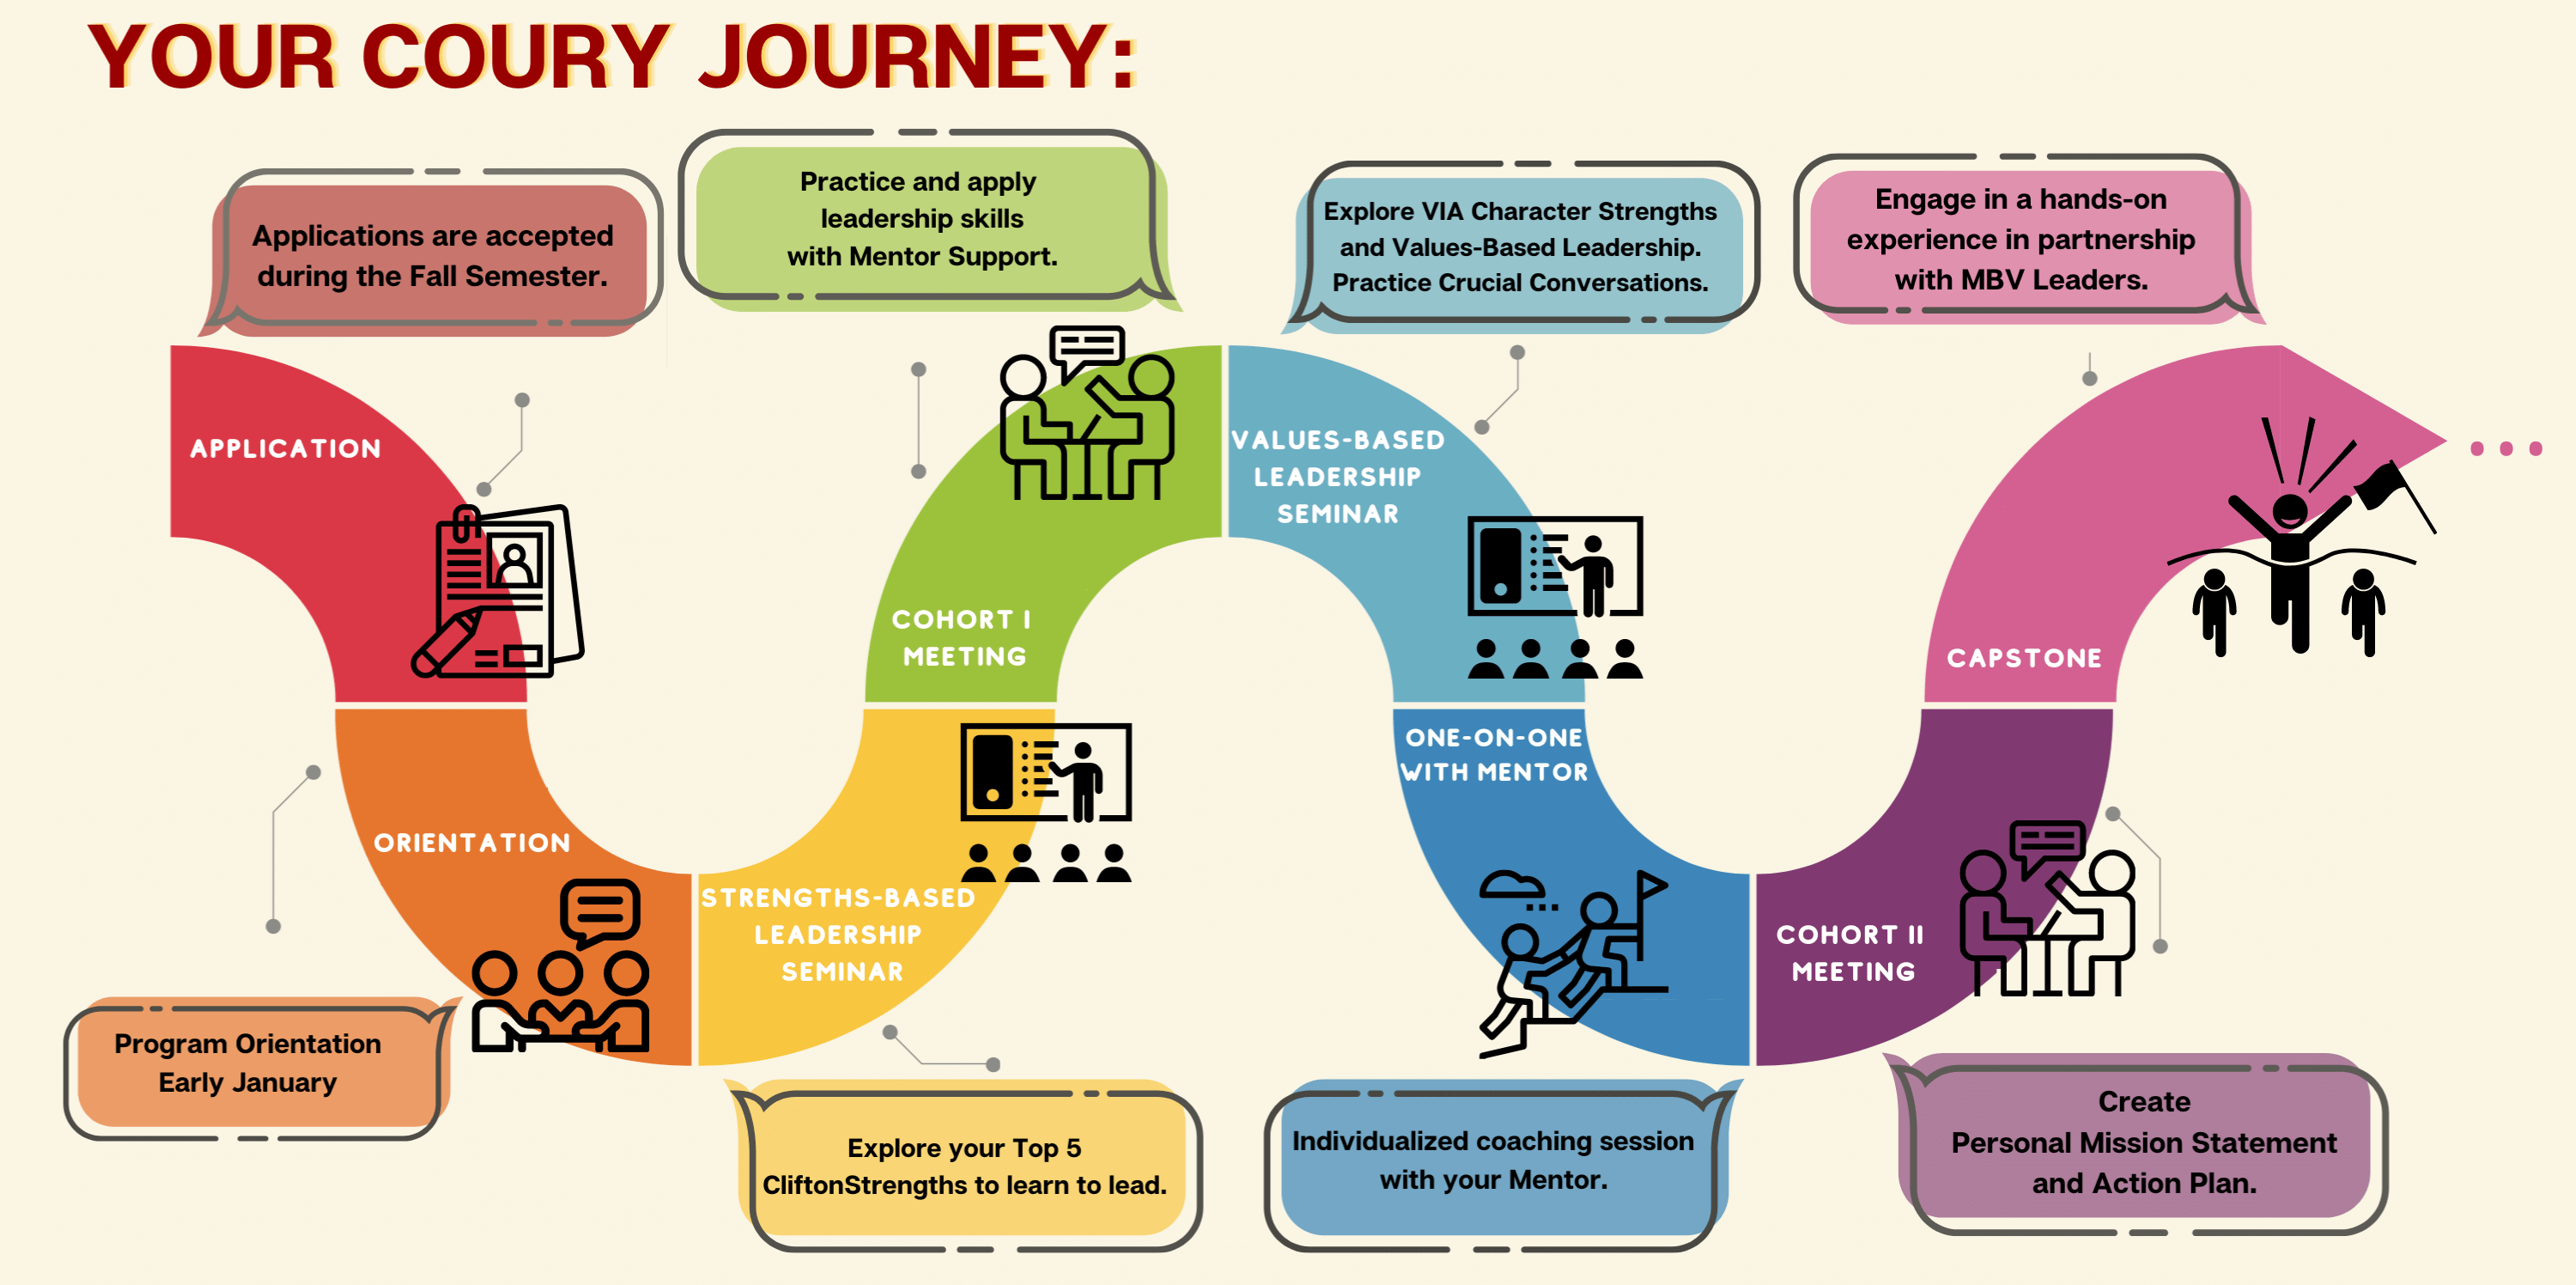 Coury Leadership Journey Map - Application, Orientation, Strengths Based Leadership SEminar, Cohort Meeting, Values based Leadership seminar, cohort meeting, one on one meeting with mentor, capstone event